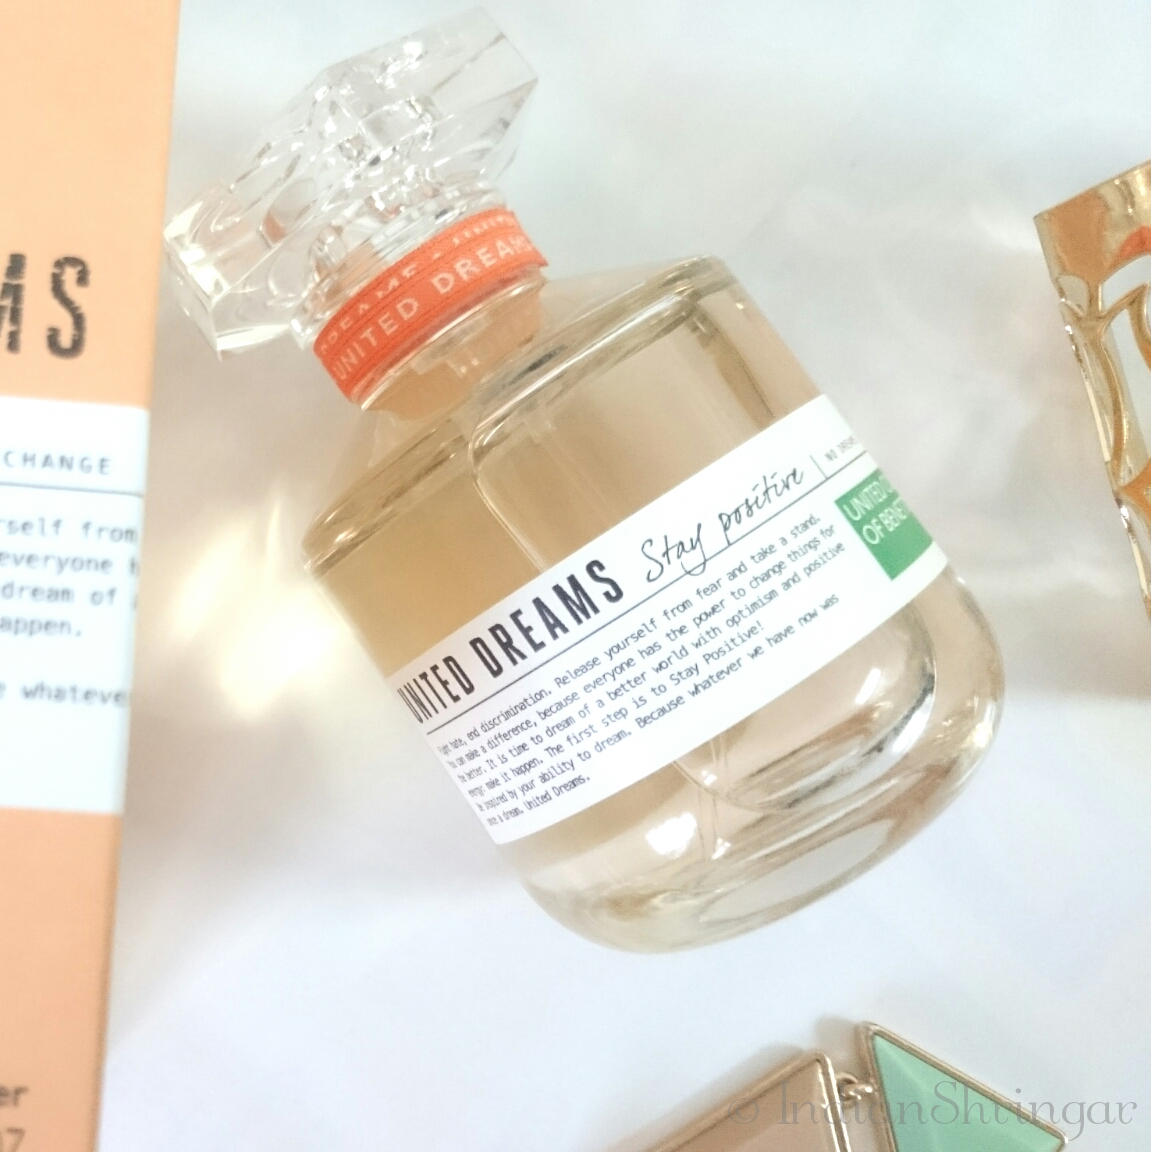 Benetton United Dreams EDT review